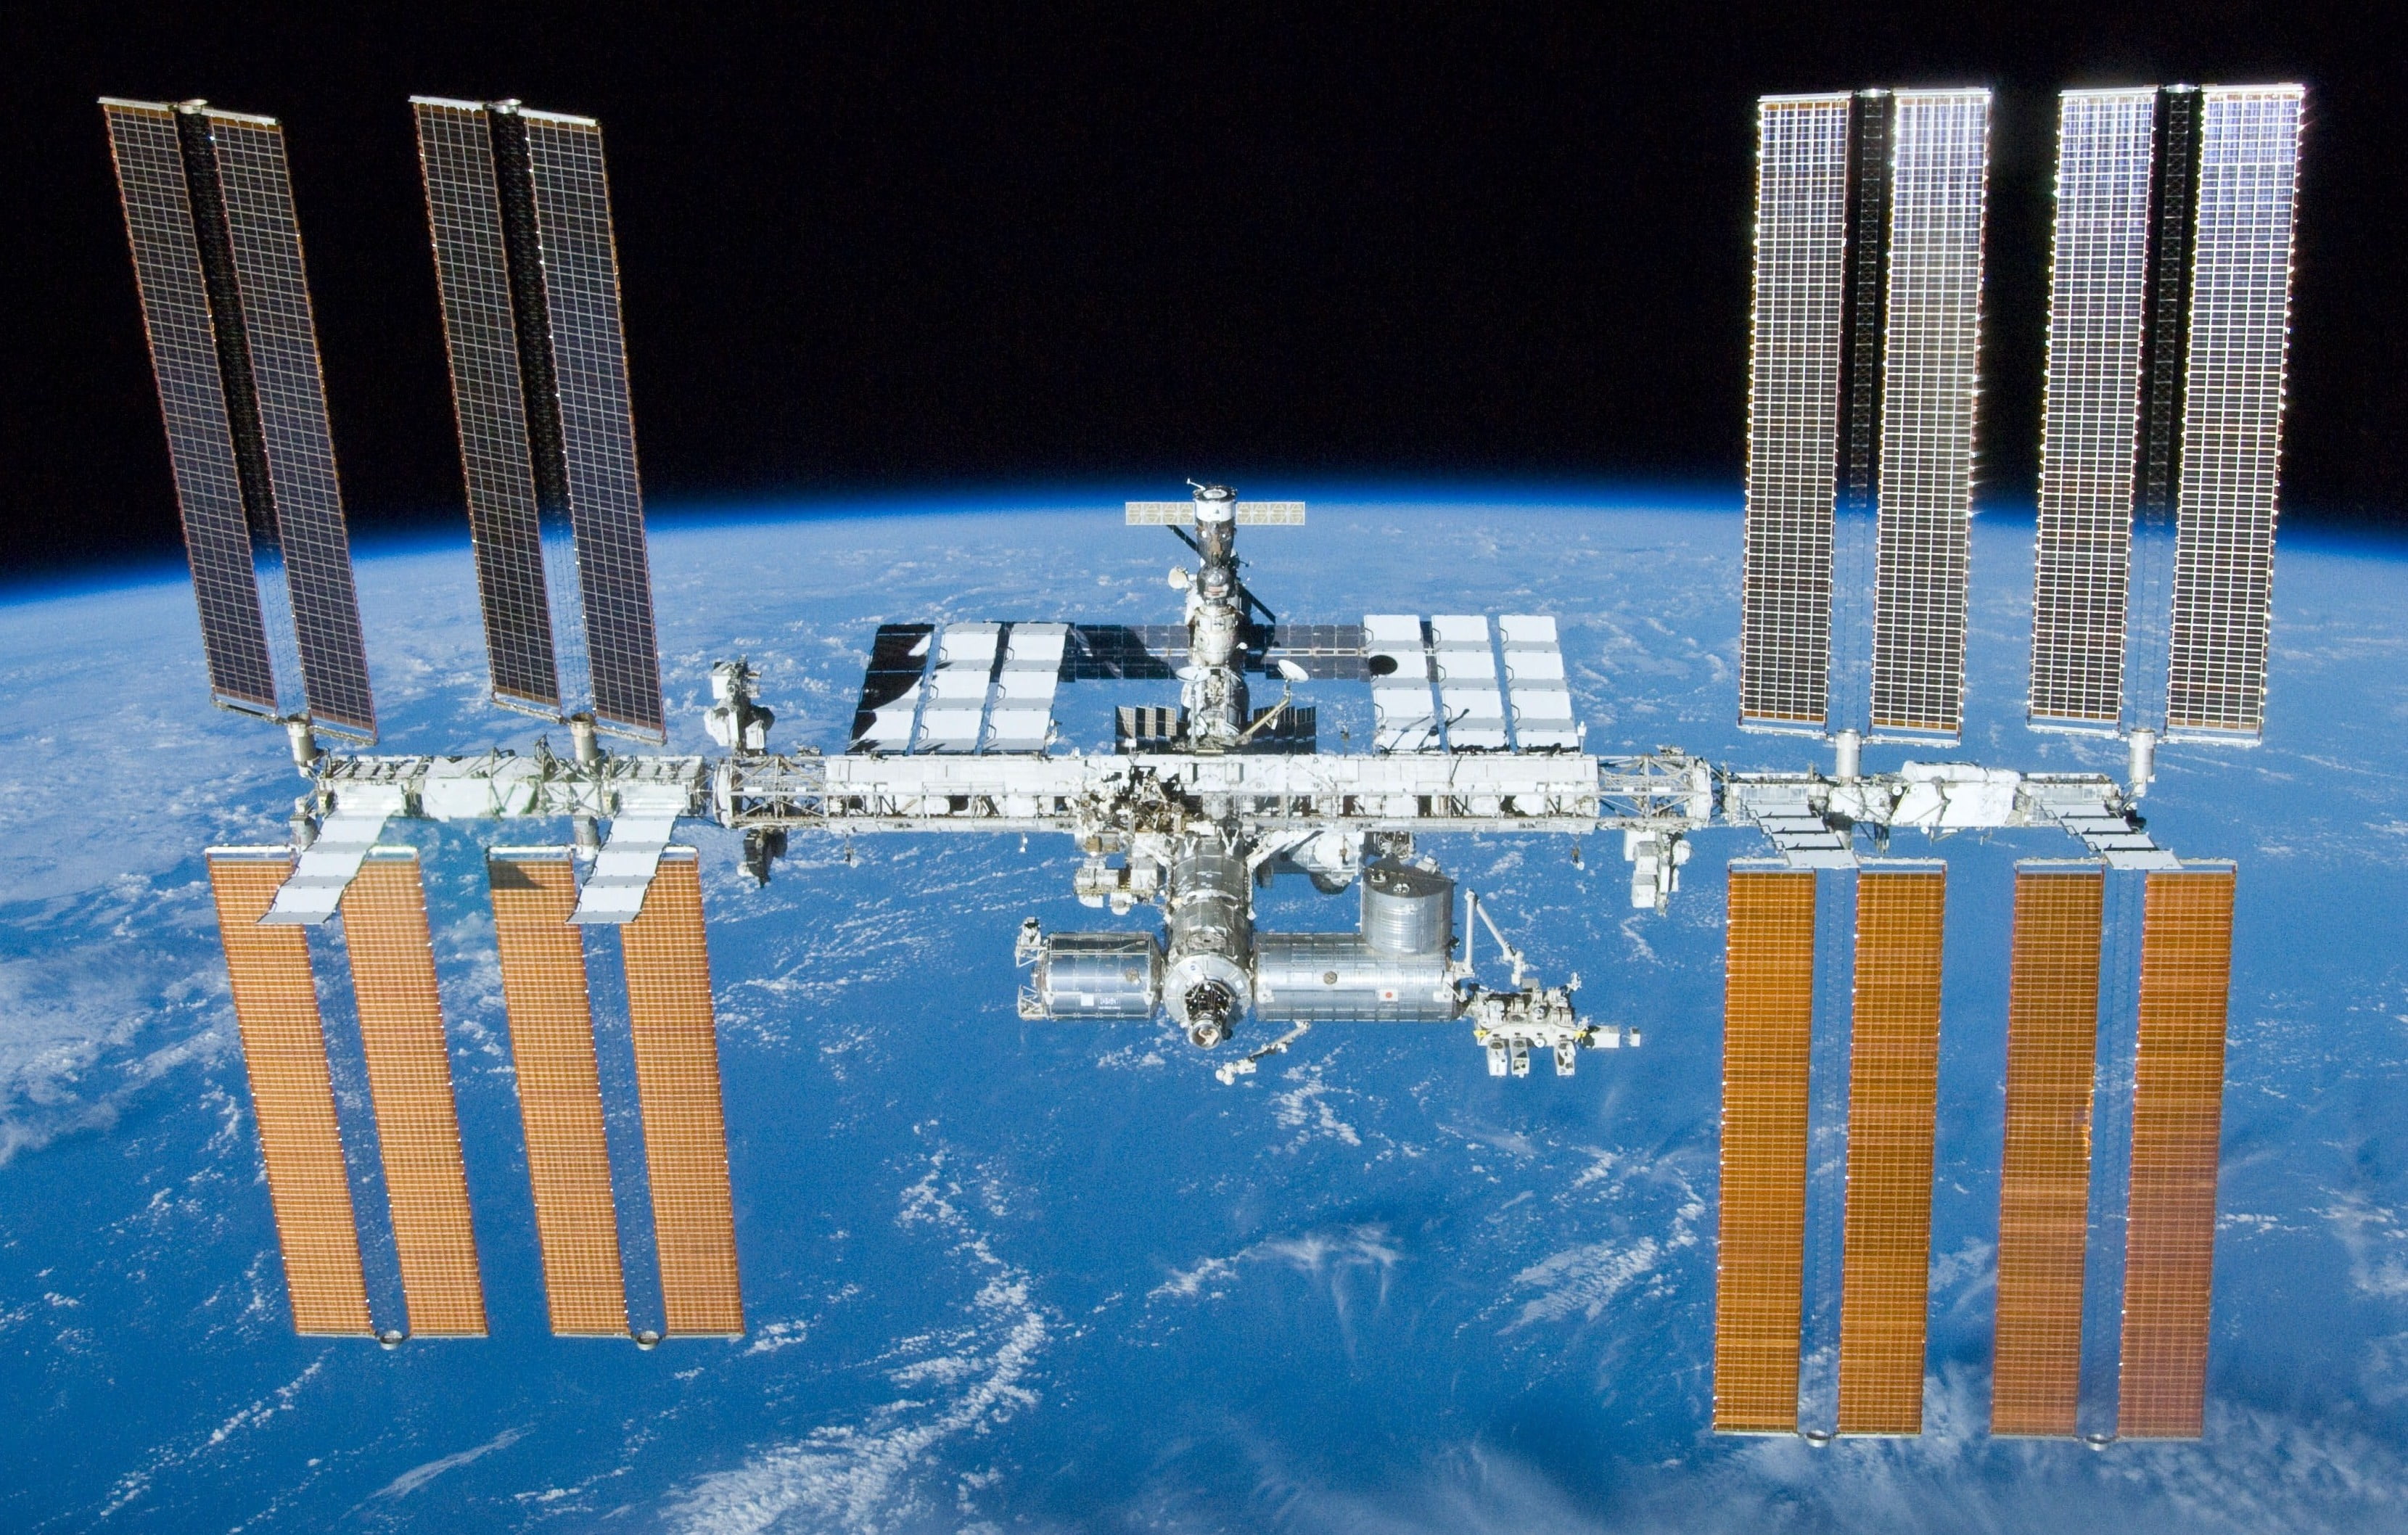 Space station photo attempts to convey satellite’s high speed